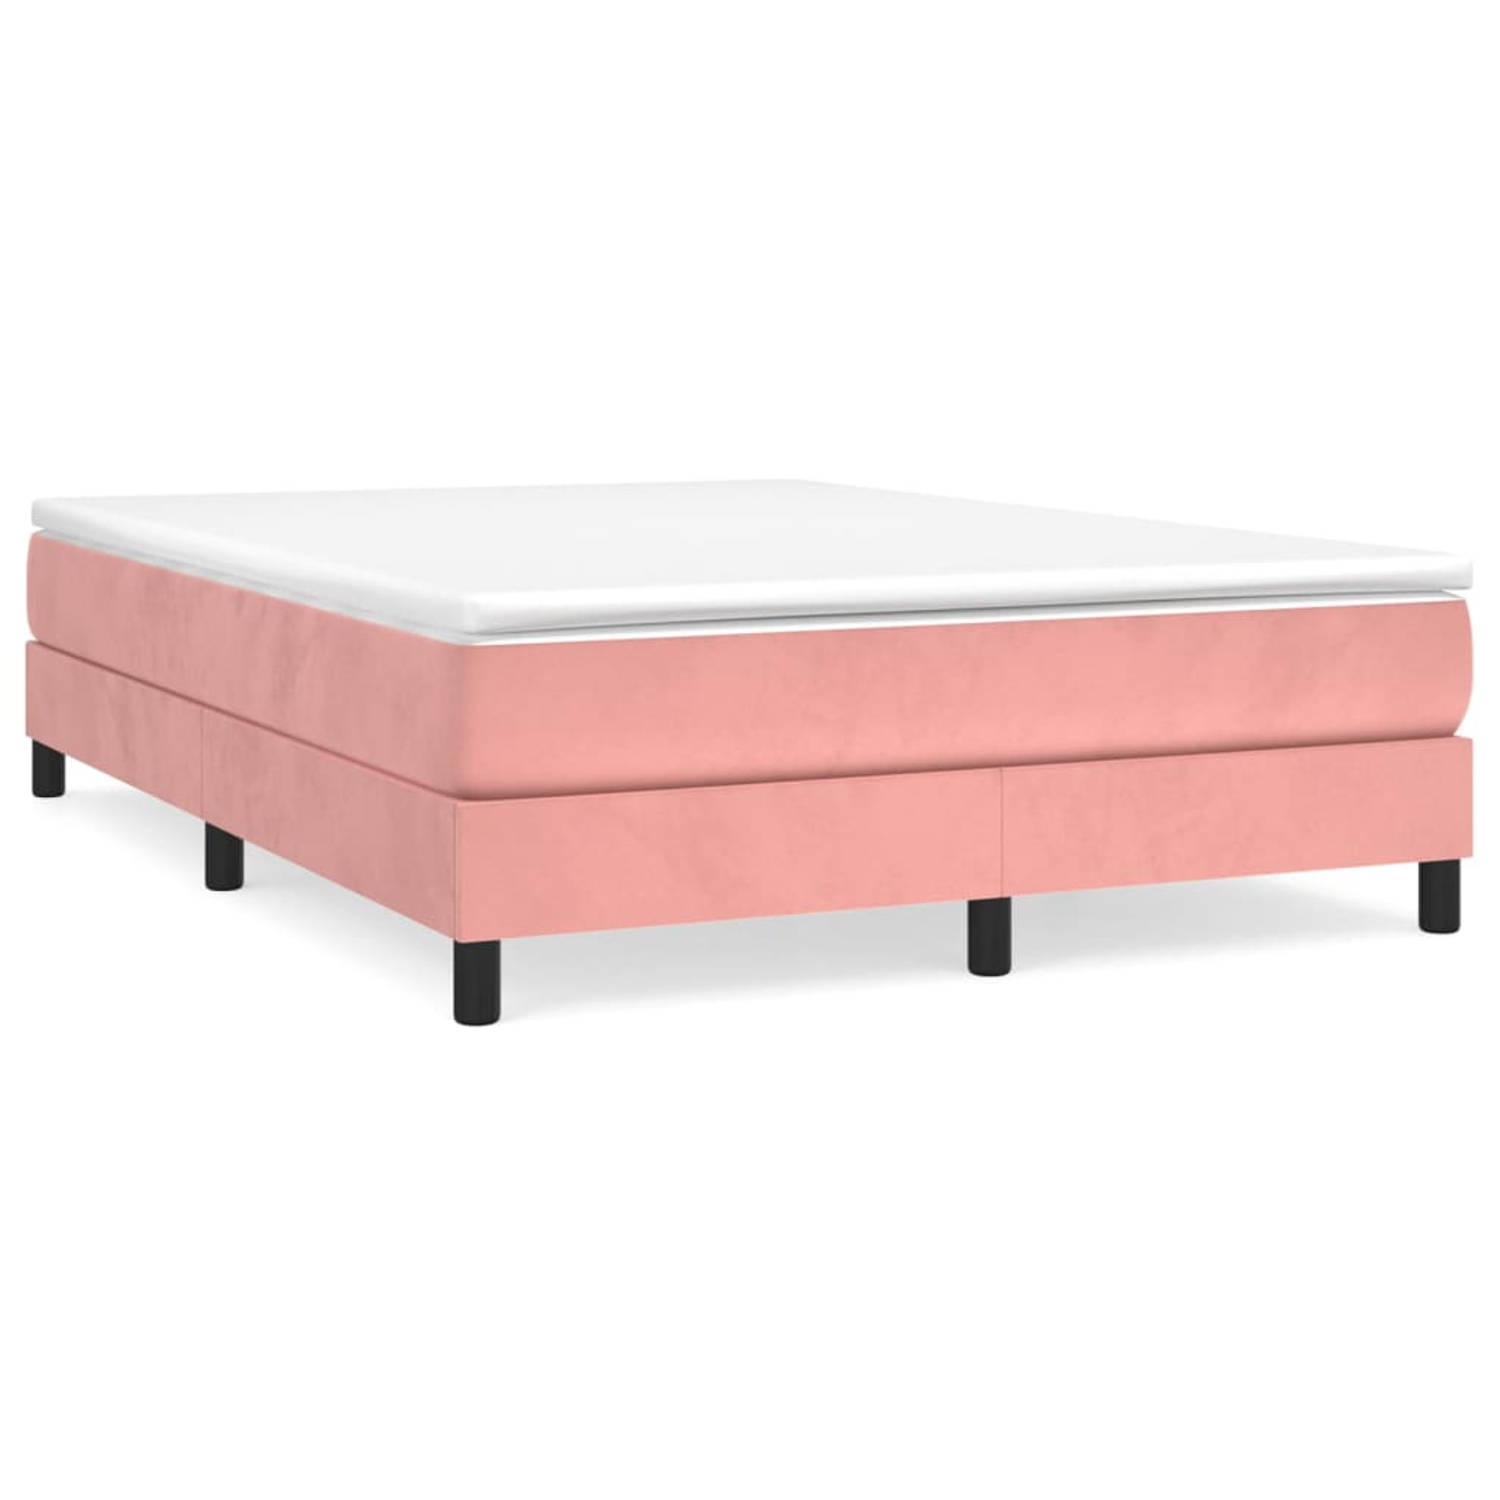 The Living Store Boxspringframe fluweel roze 140x190 cm - Bed